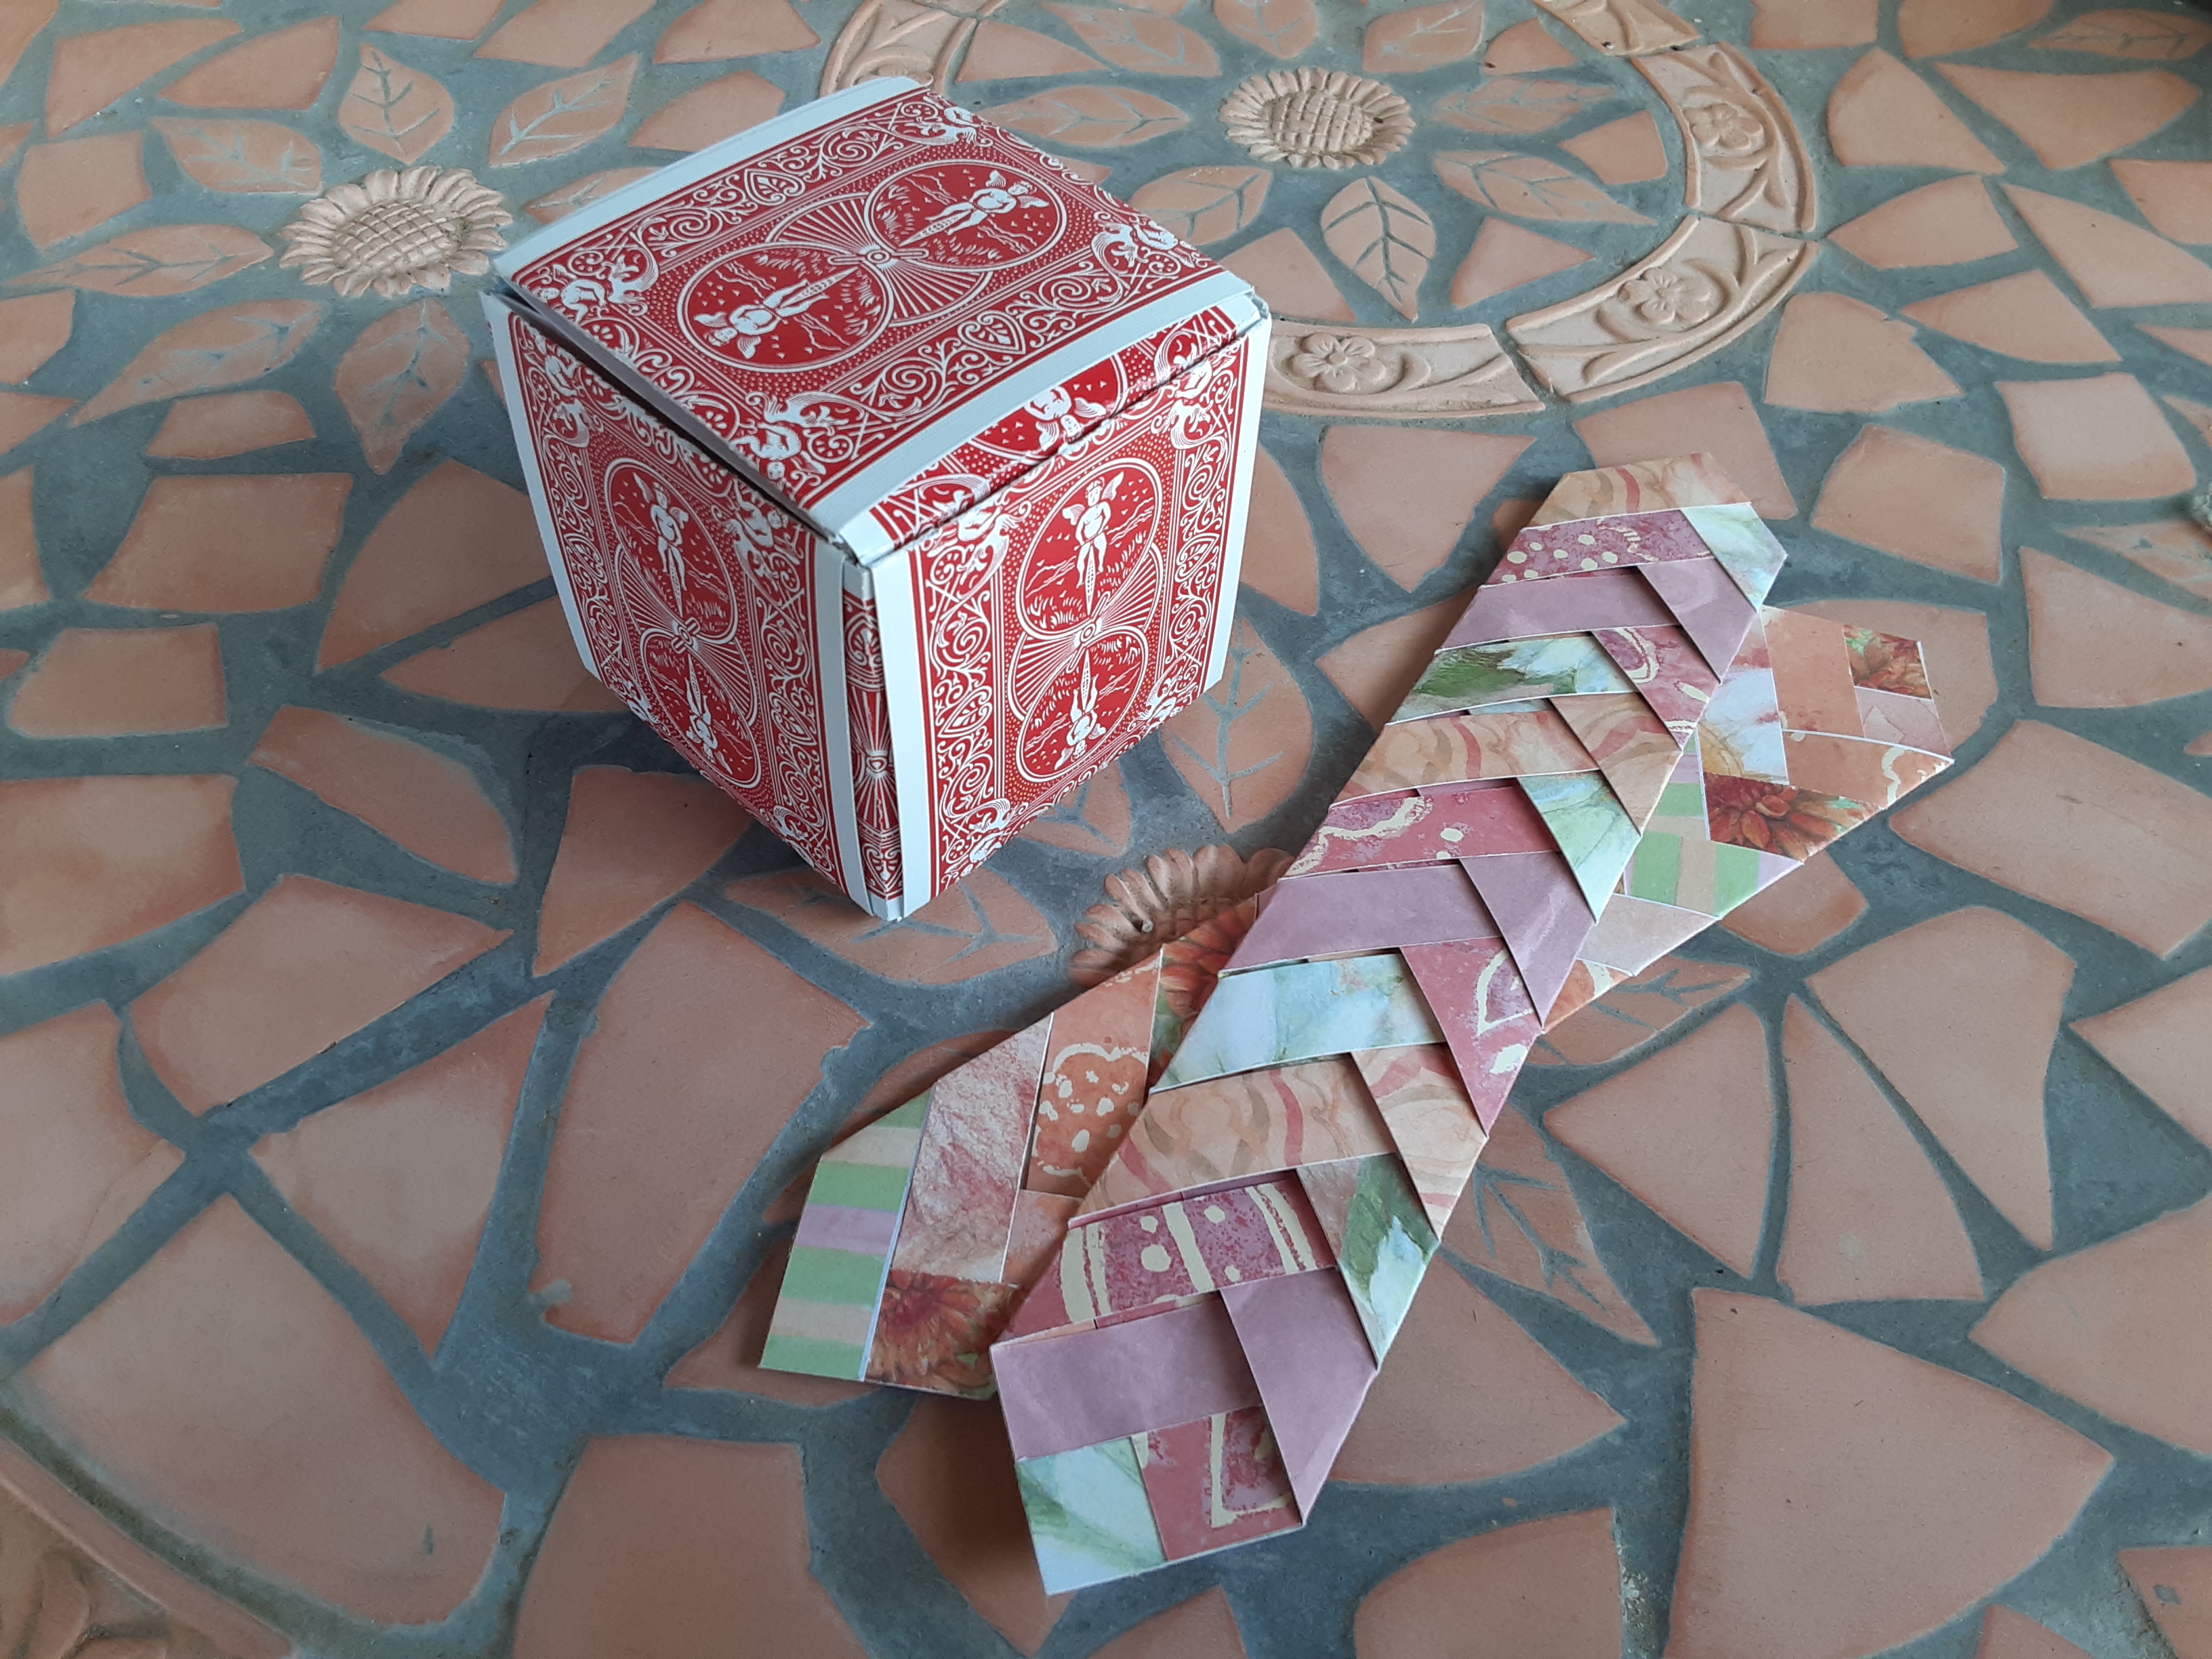 A box made of playing cards and two braided paper bookmarks.